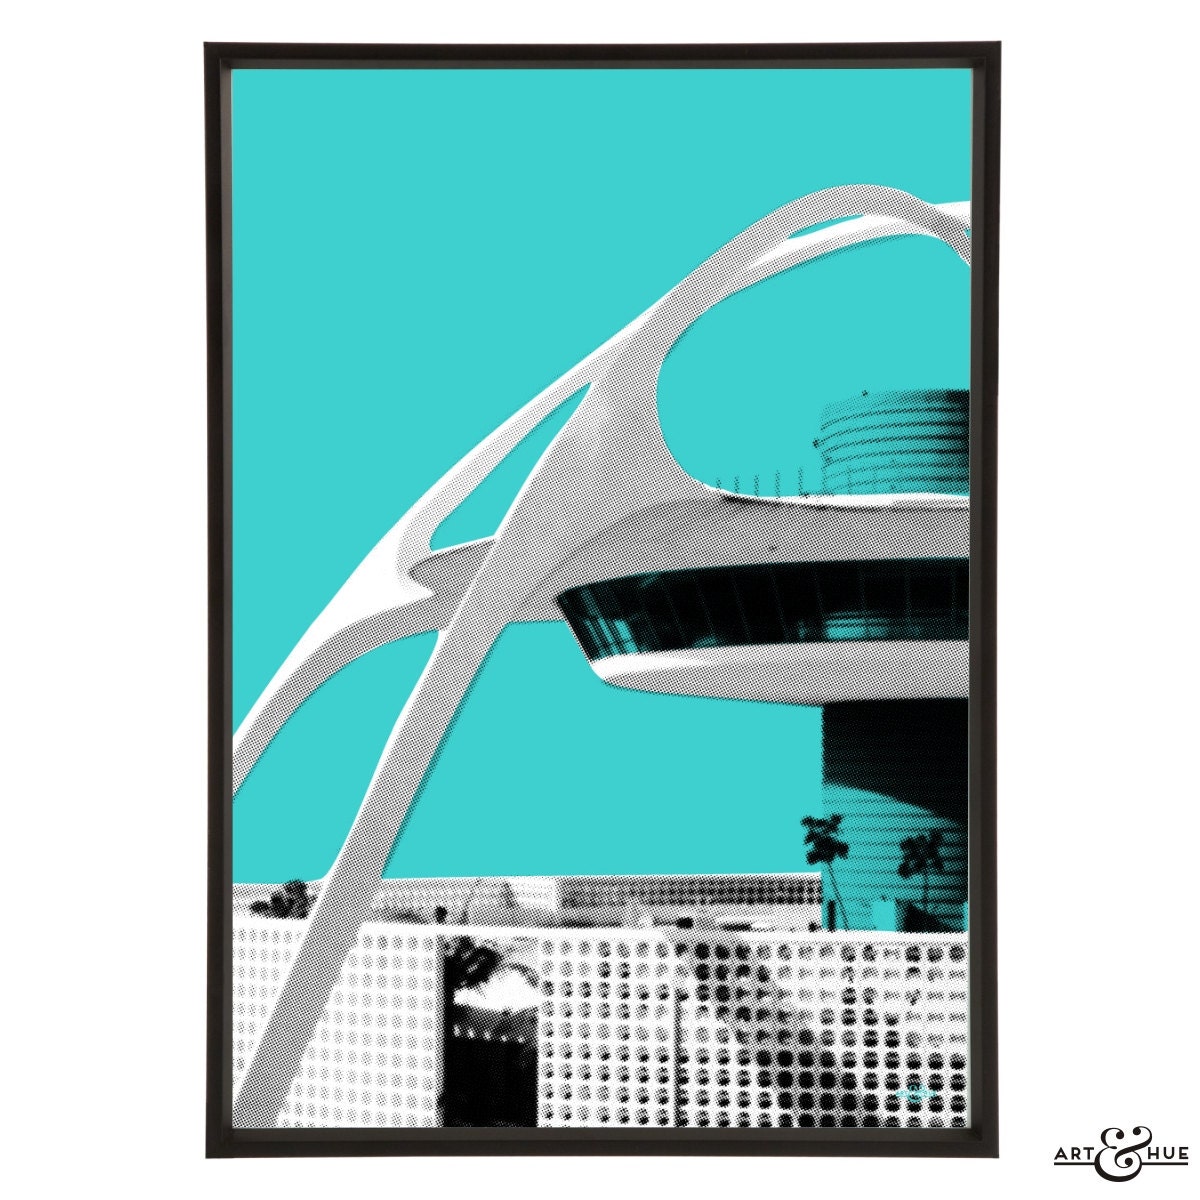 Building Travel in Pop Airport LAX Angeles at Retro Graphic Theme Print Jet - Set Etsy Art Architecture Air Los